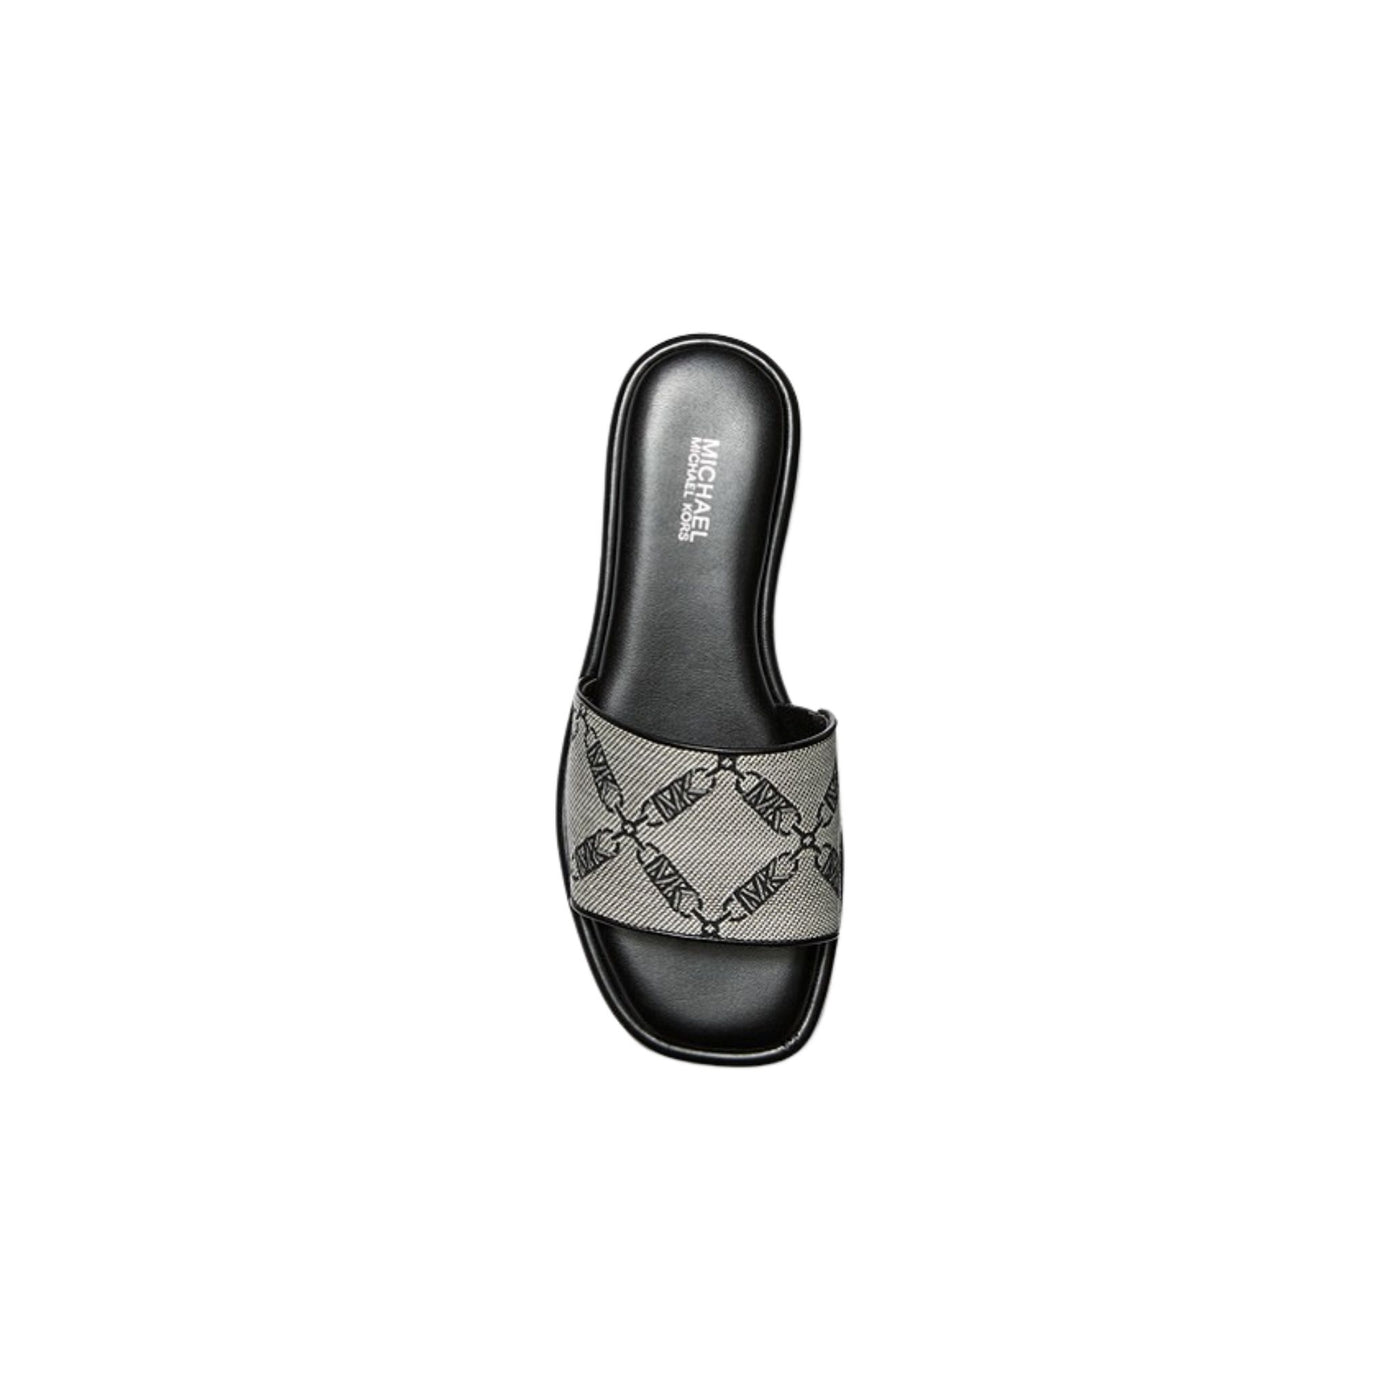 Women's slippers with jacquard logo